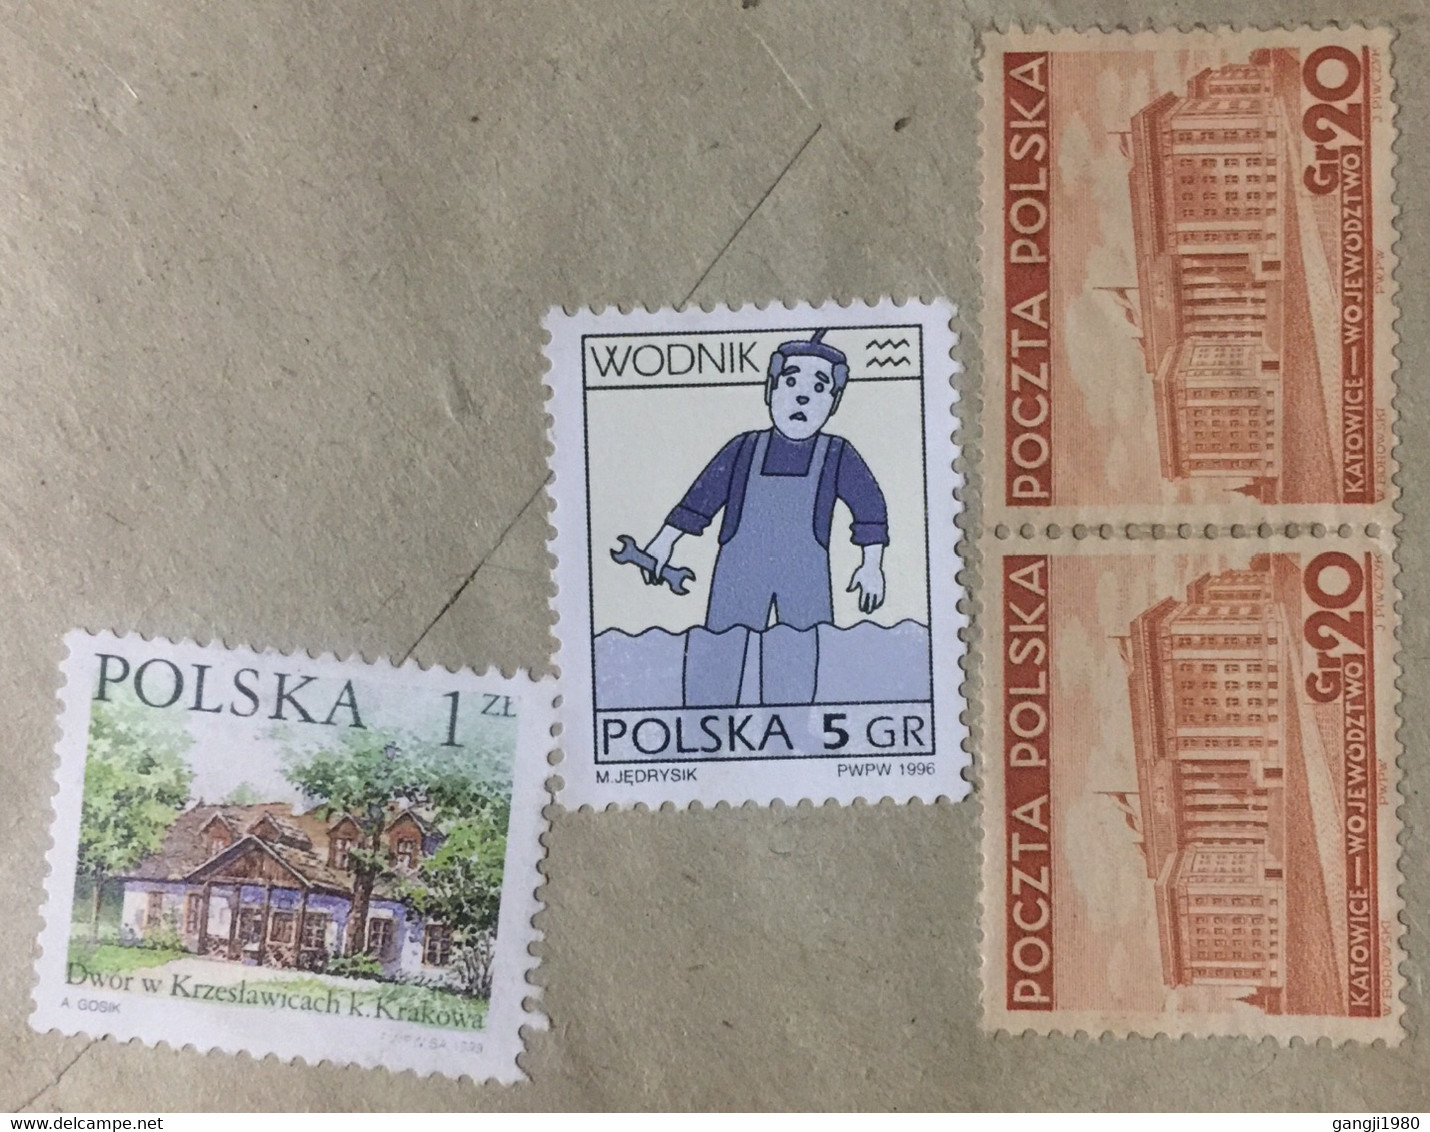 POLAND 2000, USED AIRMAIL COVER TO INDIA 4 DIFFERENT 1958 PICTURAL SPECIAL CANCELLATION, KATOWIDE ,HOUSE MUSIC,BUILDIN, - Brieven En Documenten